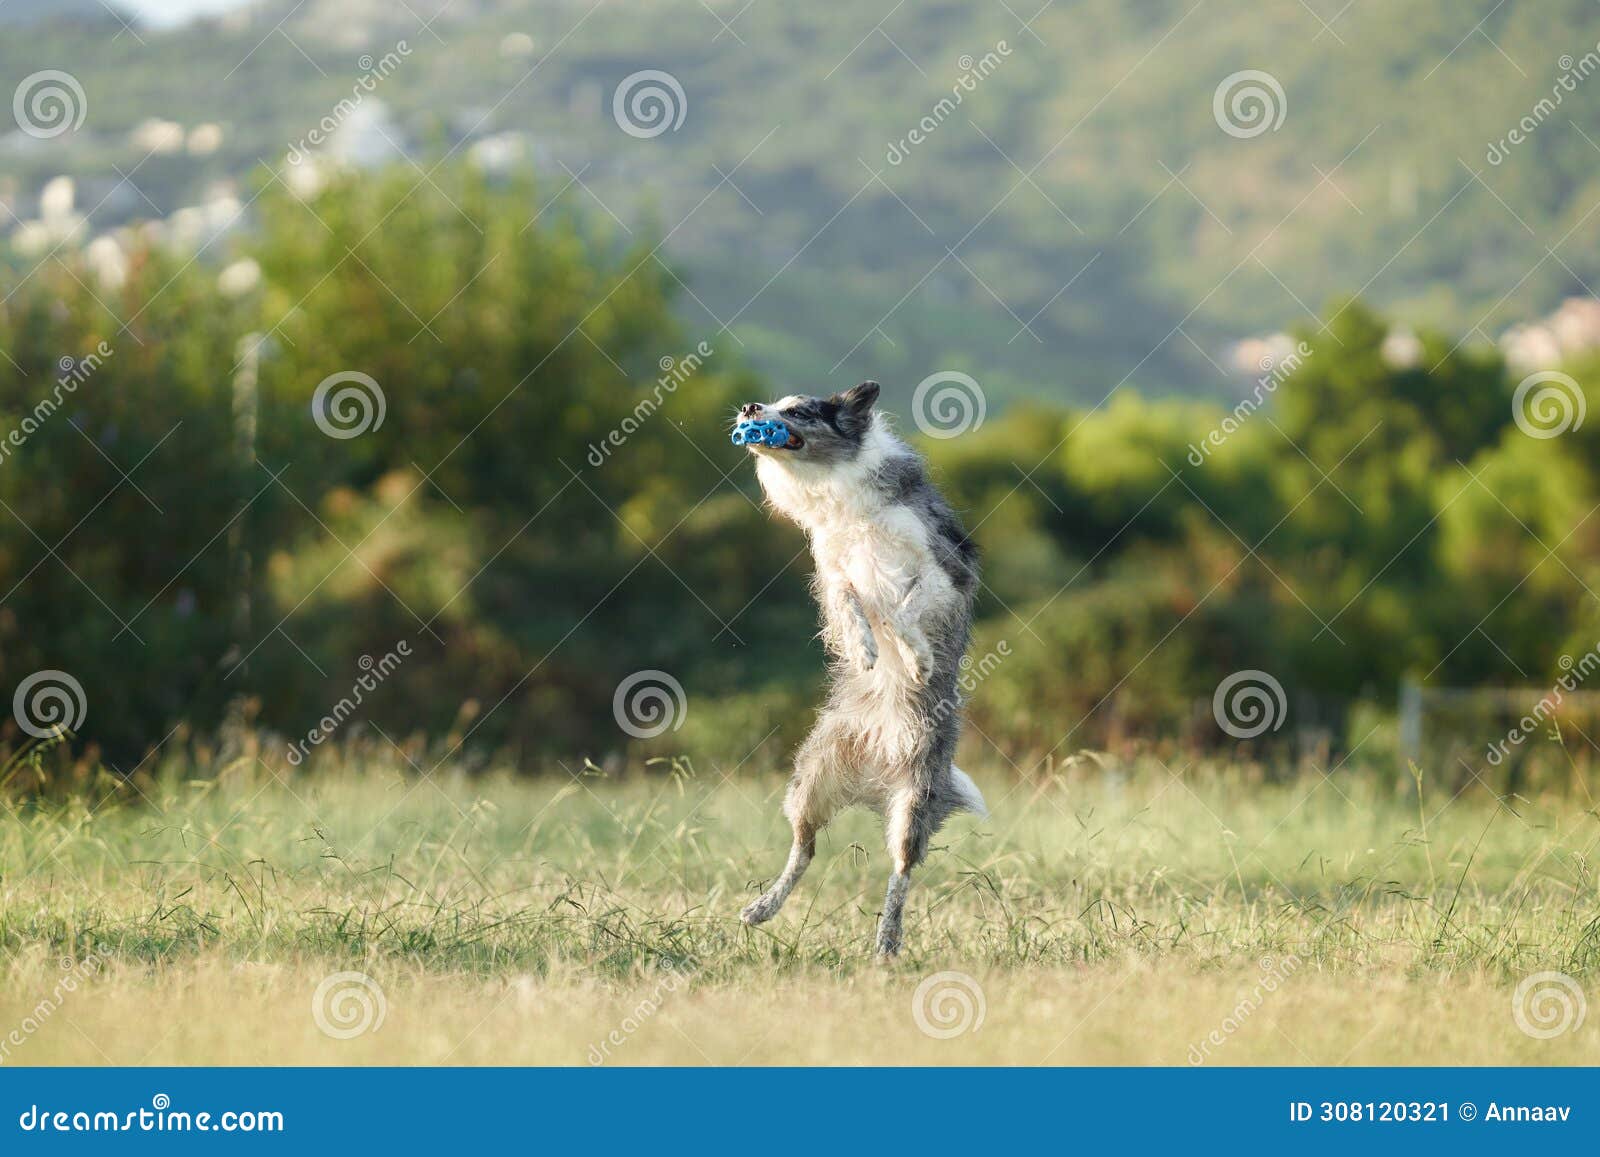 a border collie dog jubilantly leaps into the air, catching a blue ball